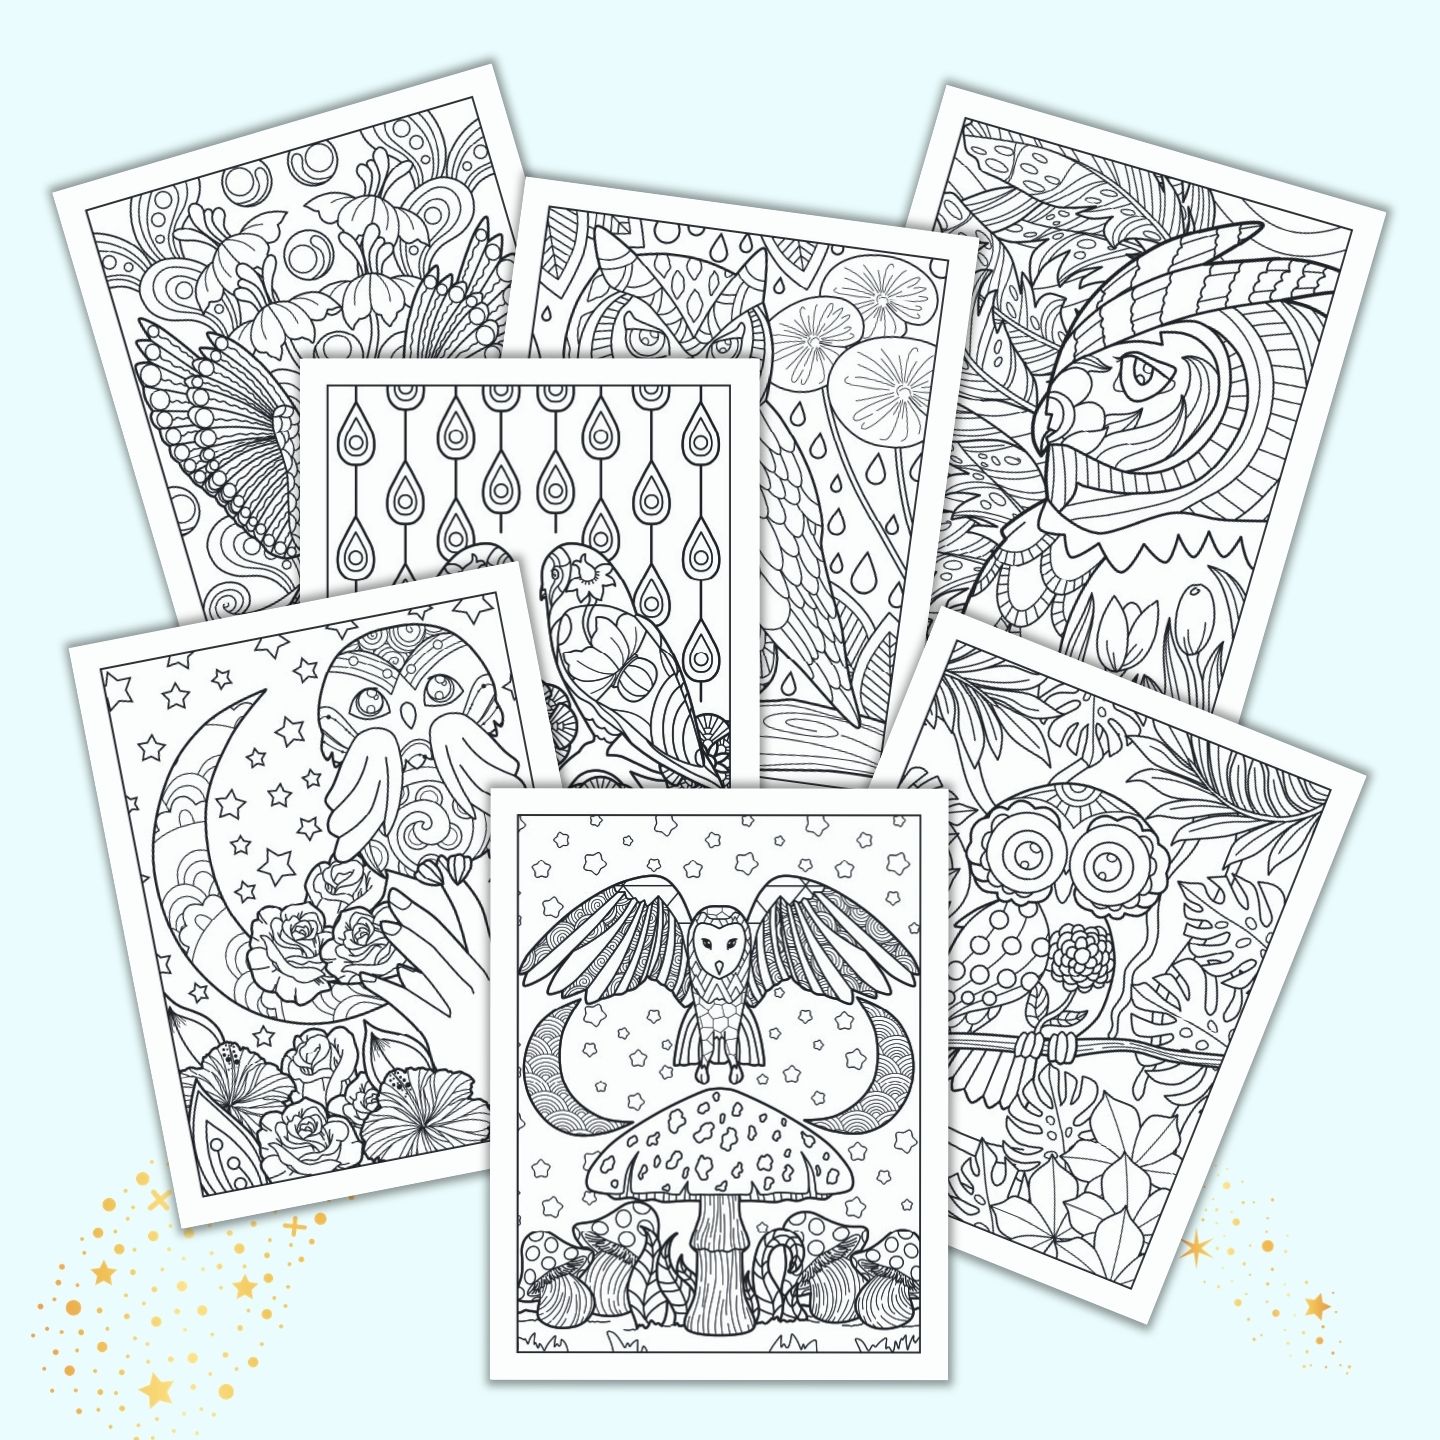 Free Printable Owl Coloring Pages for Adults   The Artisan Life